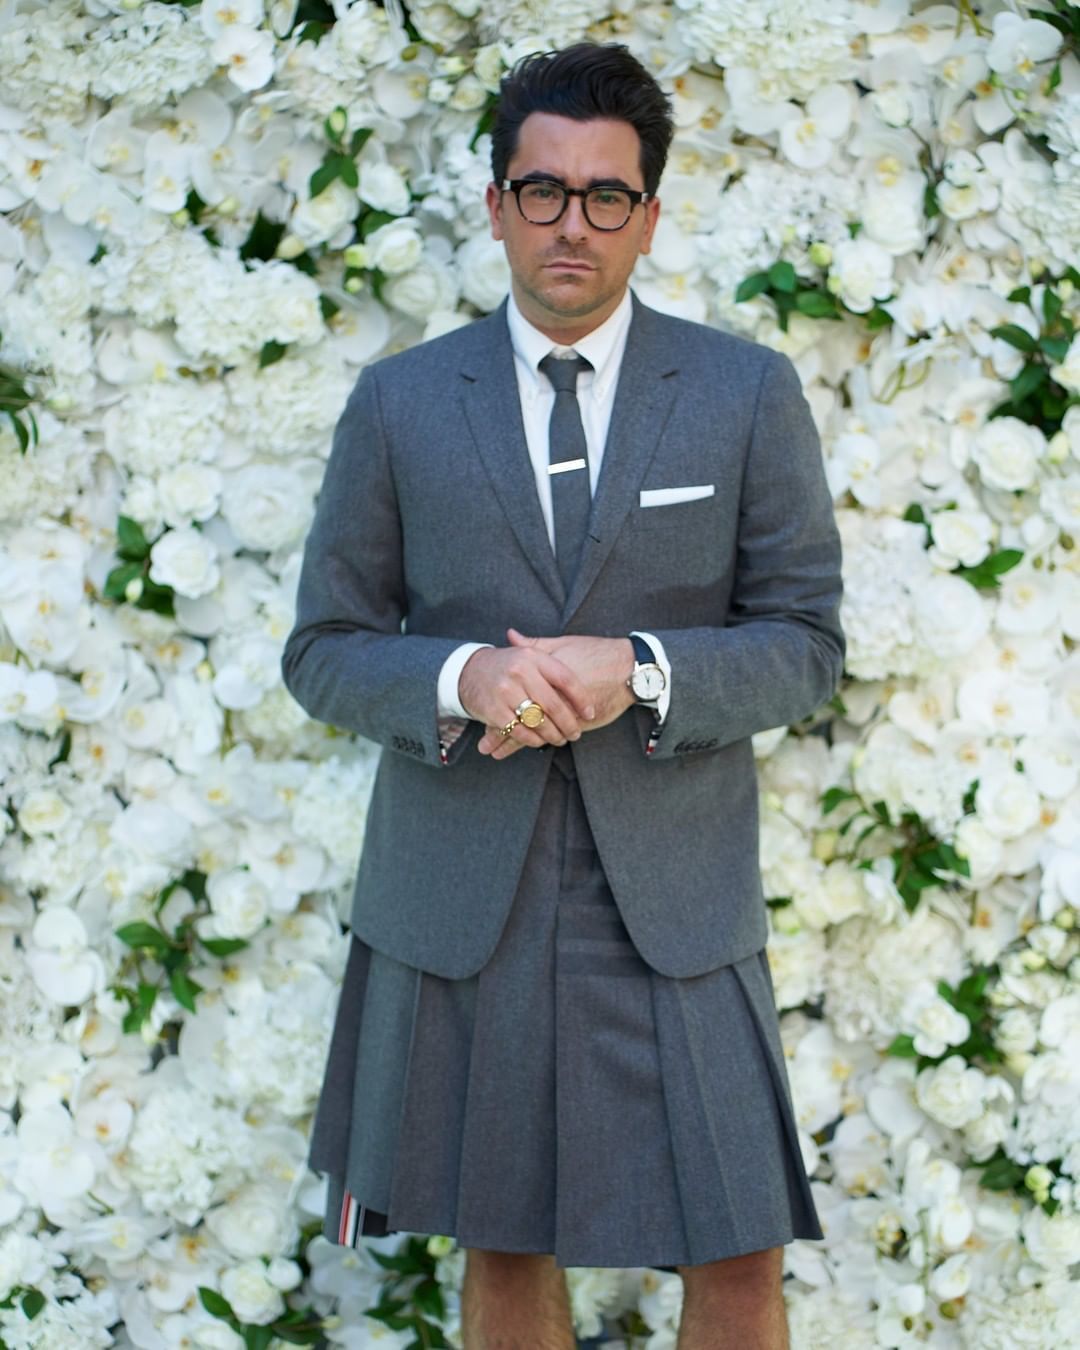 Dan Levy Emmys 2020 Outfit - See Dan Levy's Emmys Kilt Look Photos